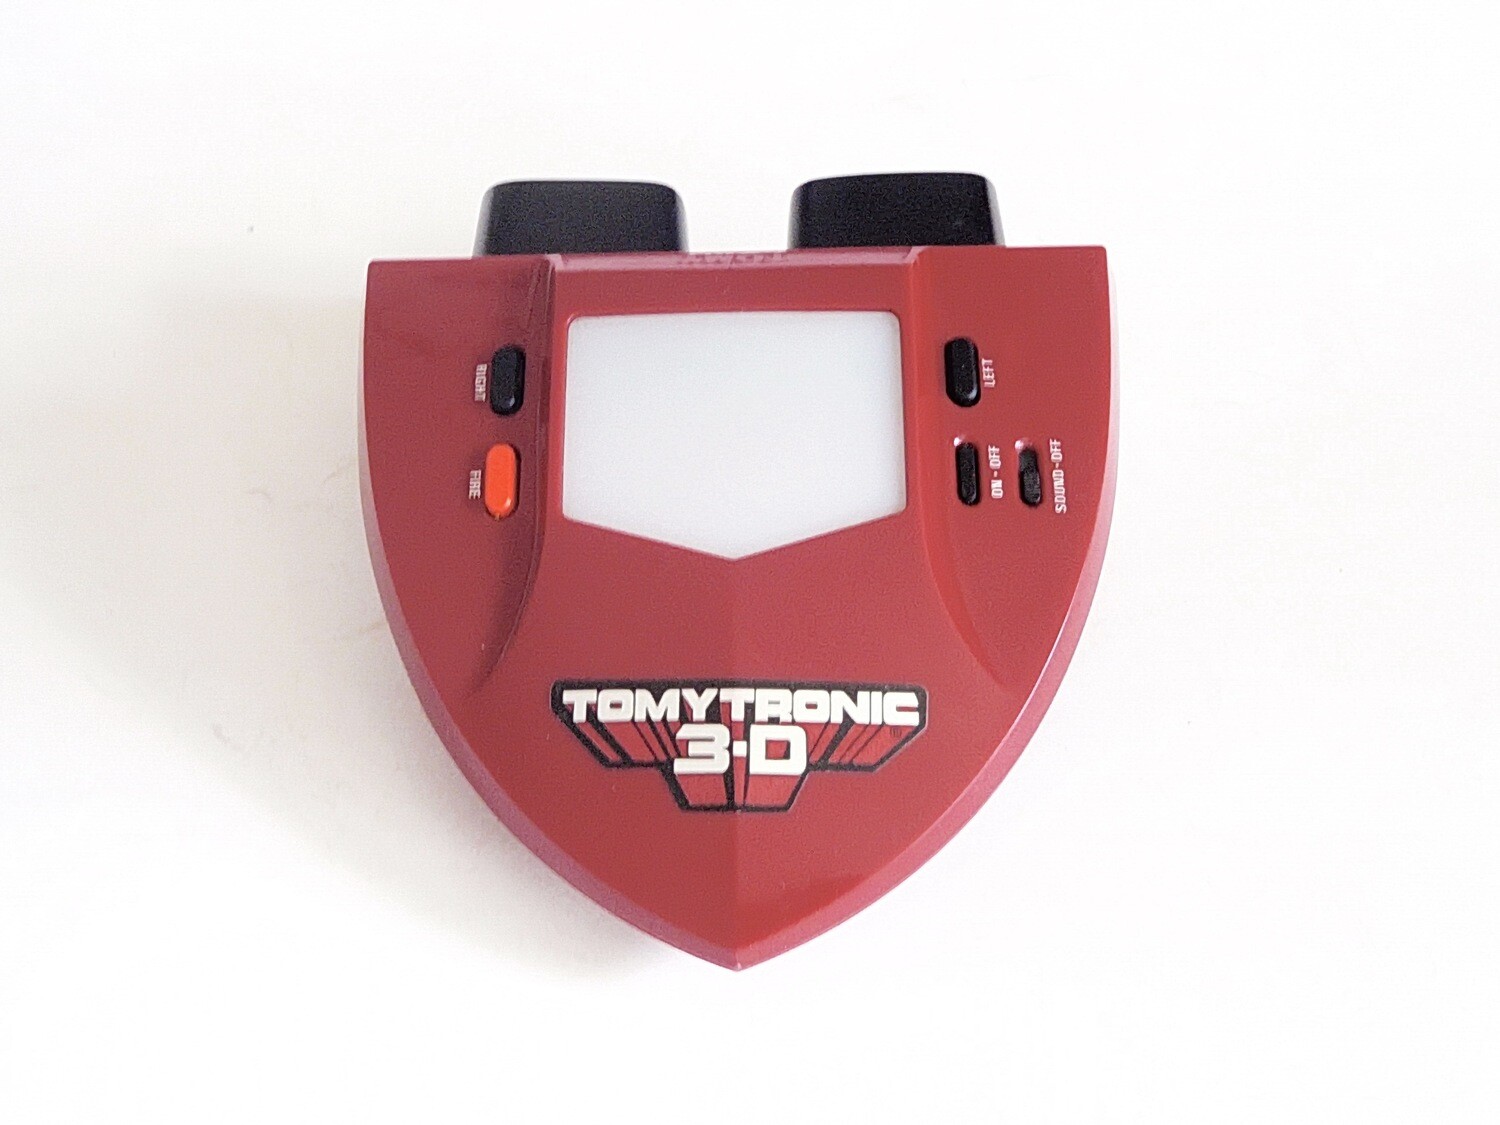 Tomytronic 3D Sky Attack Handheld Electronic Video Game